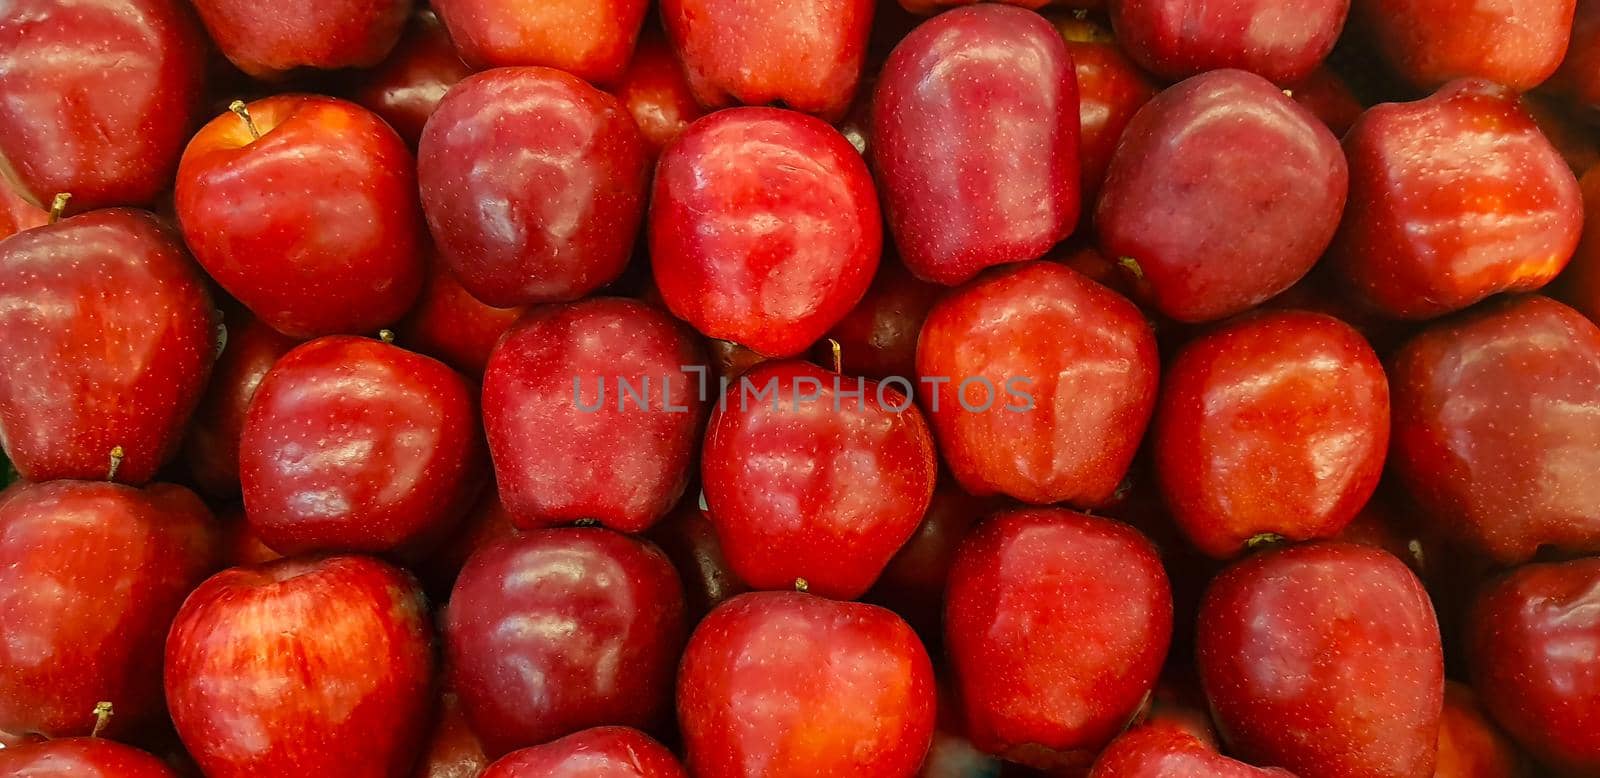 Fresh red apples good for multimedia and content background group of red ripe apples